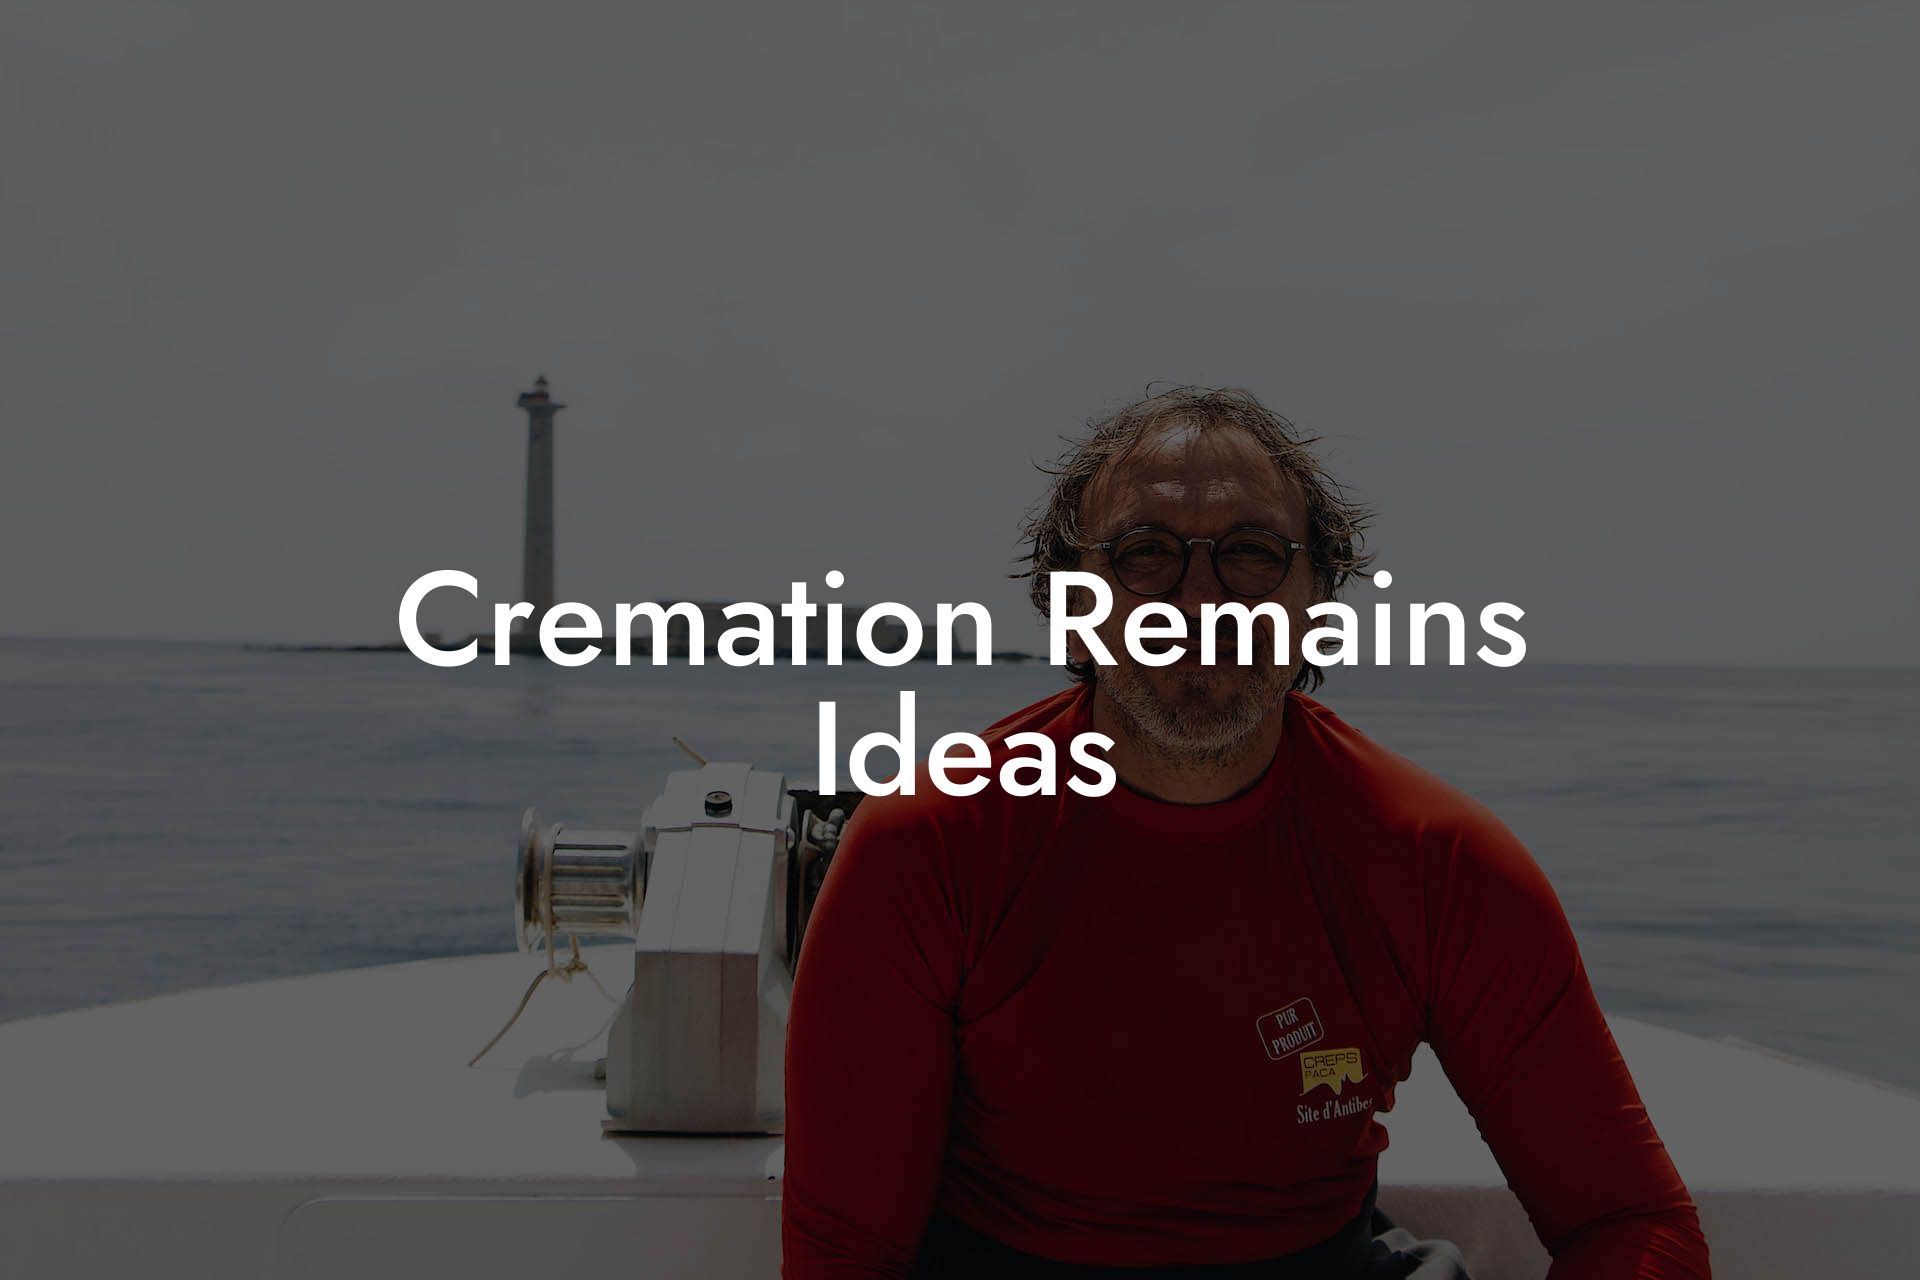 Cremation Remains Ideas